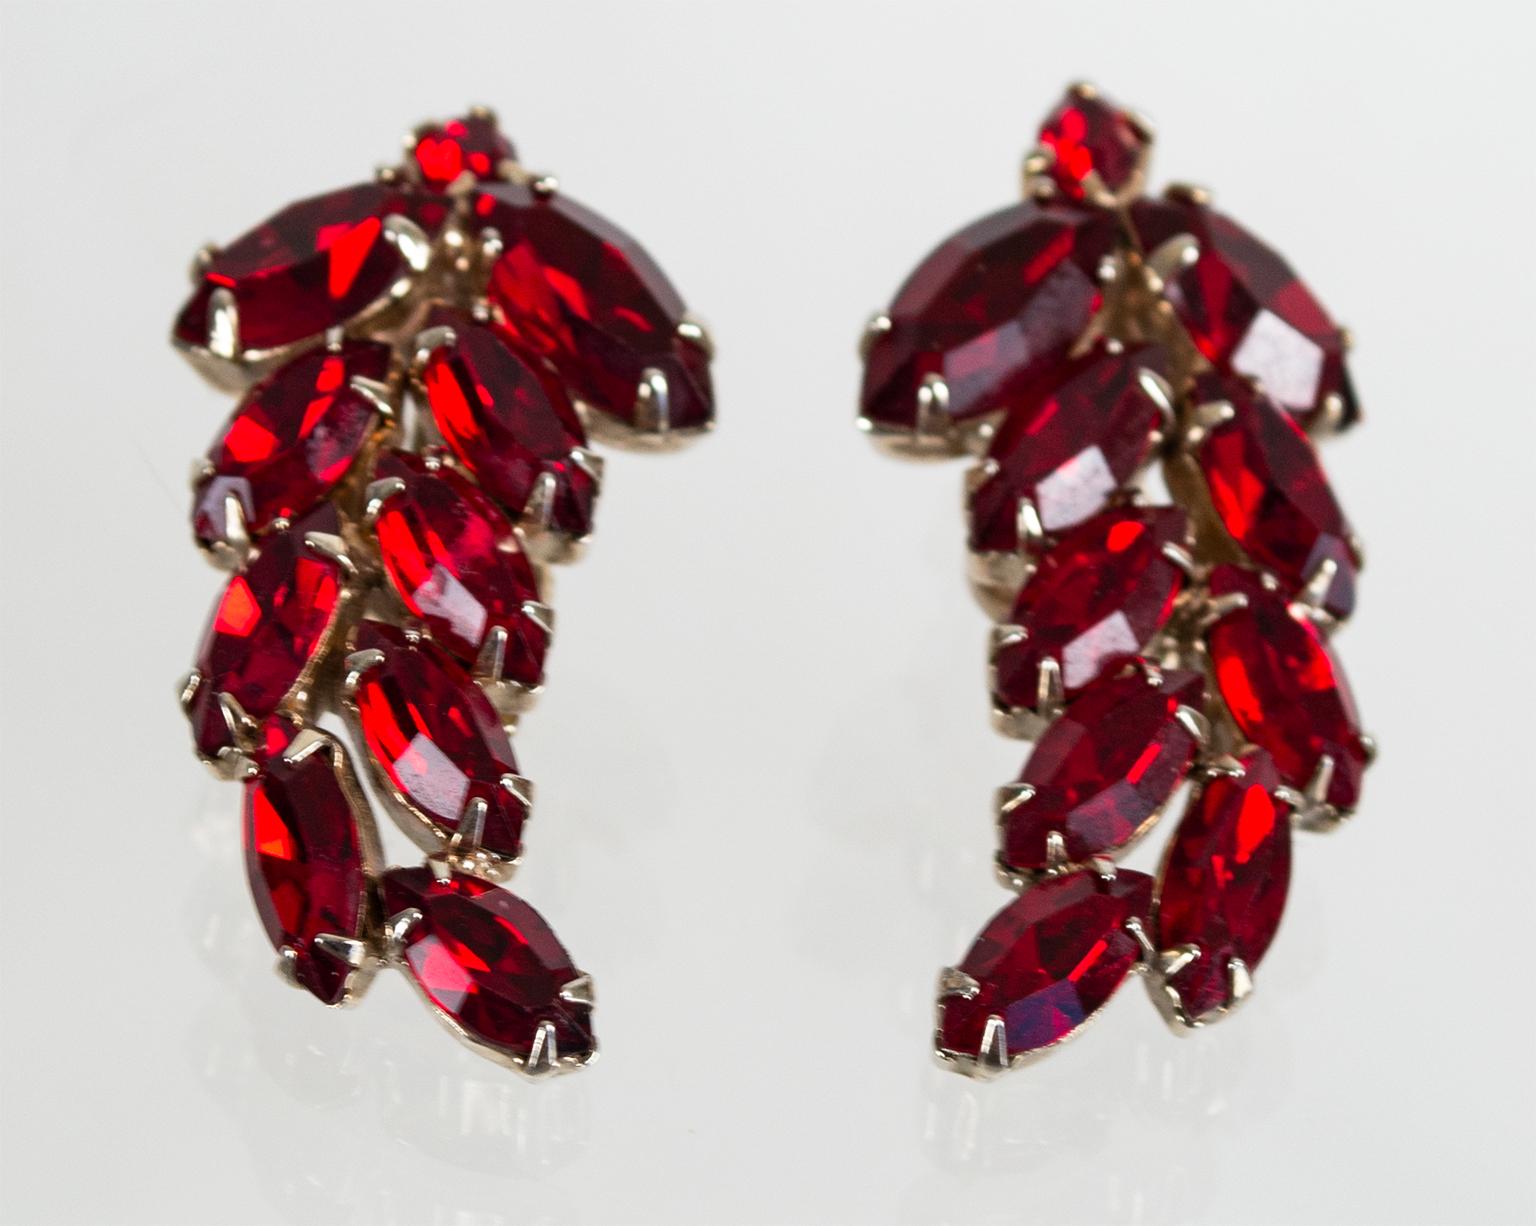 These marquis-cut crystal earrings feature a feminine vine shape so they appear to grow up the outside of the ear when worn. Their deep blood red color is a near perfect facsimile of genuine ruby, so only you will know the difference.

Curved ear